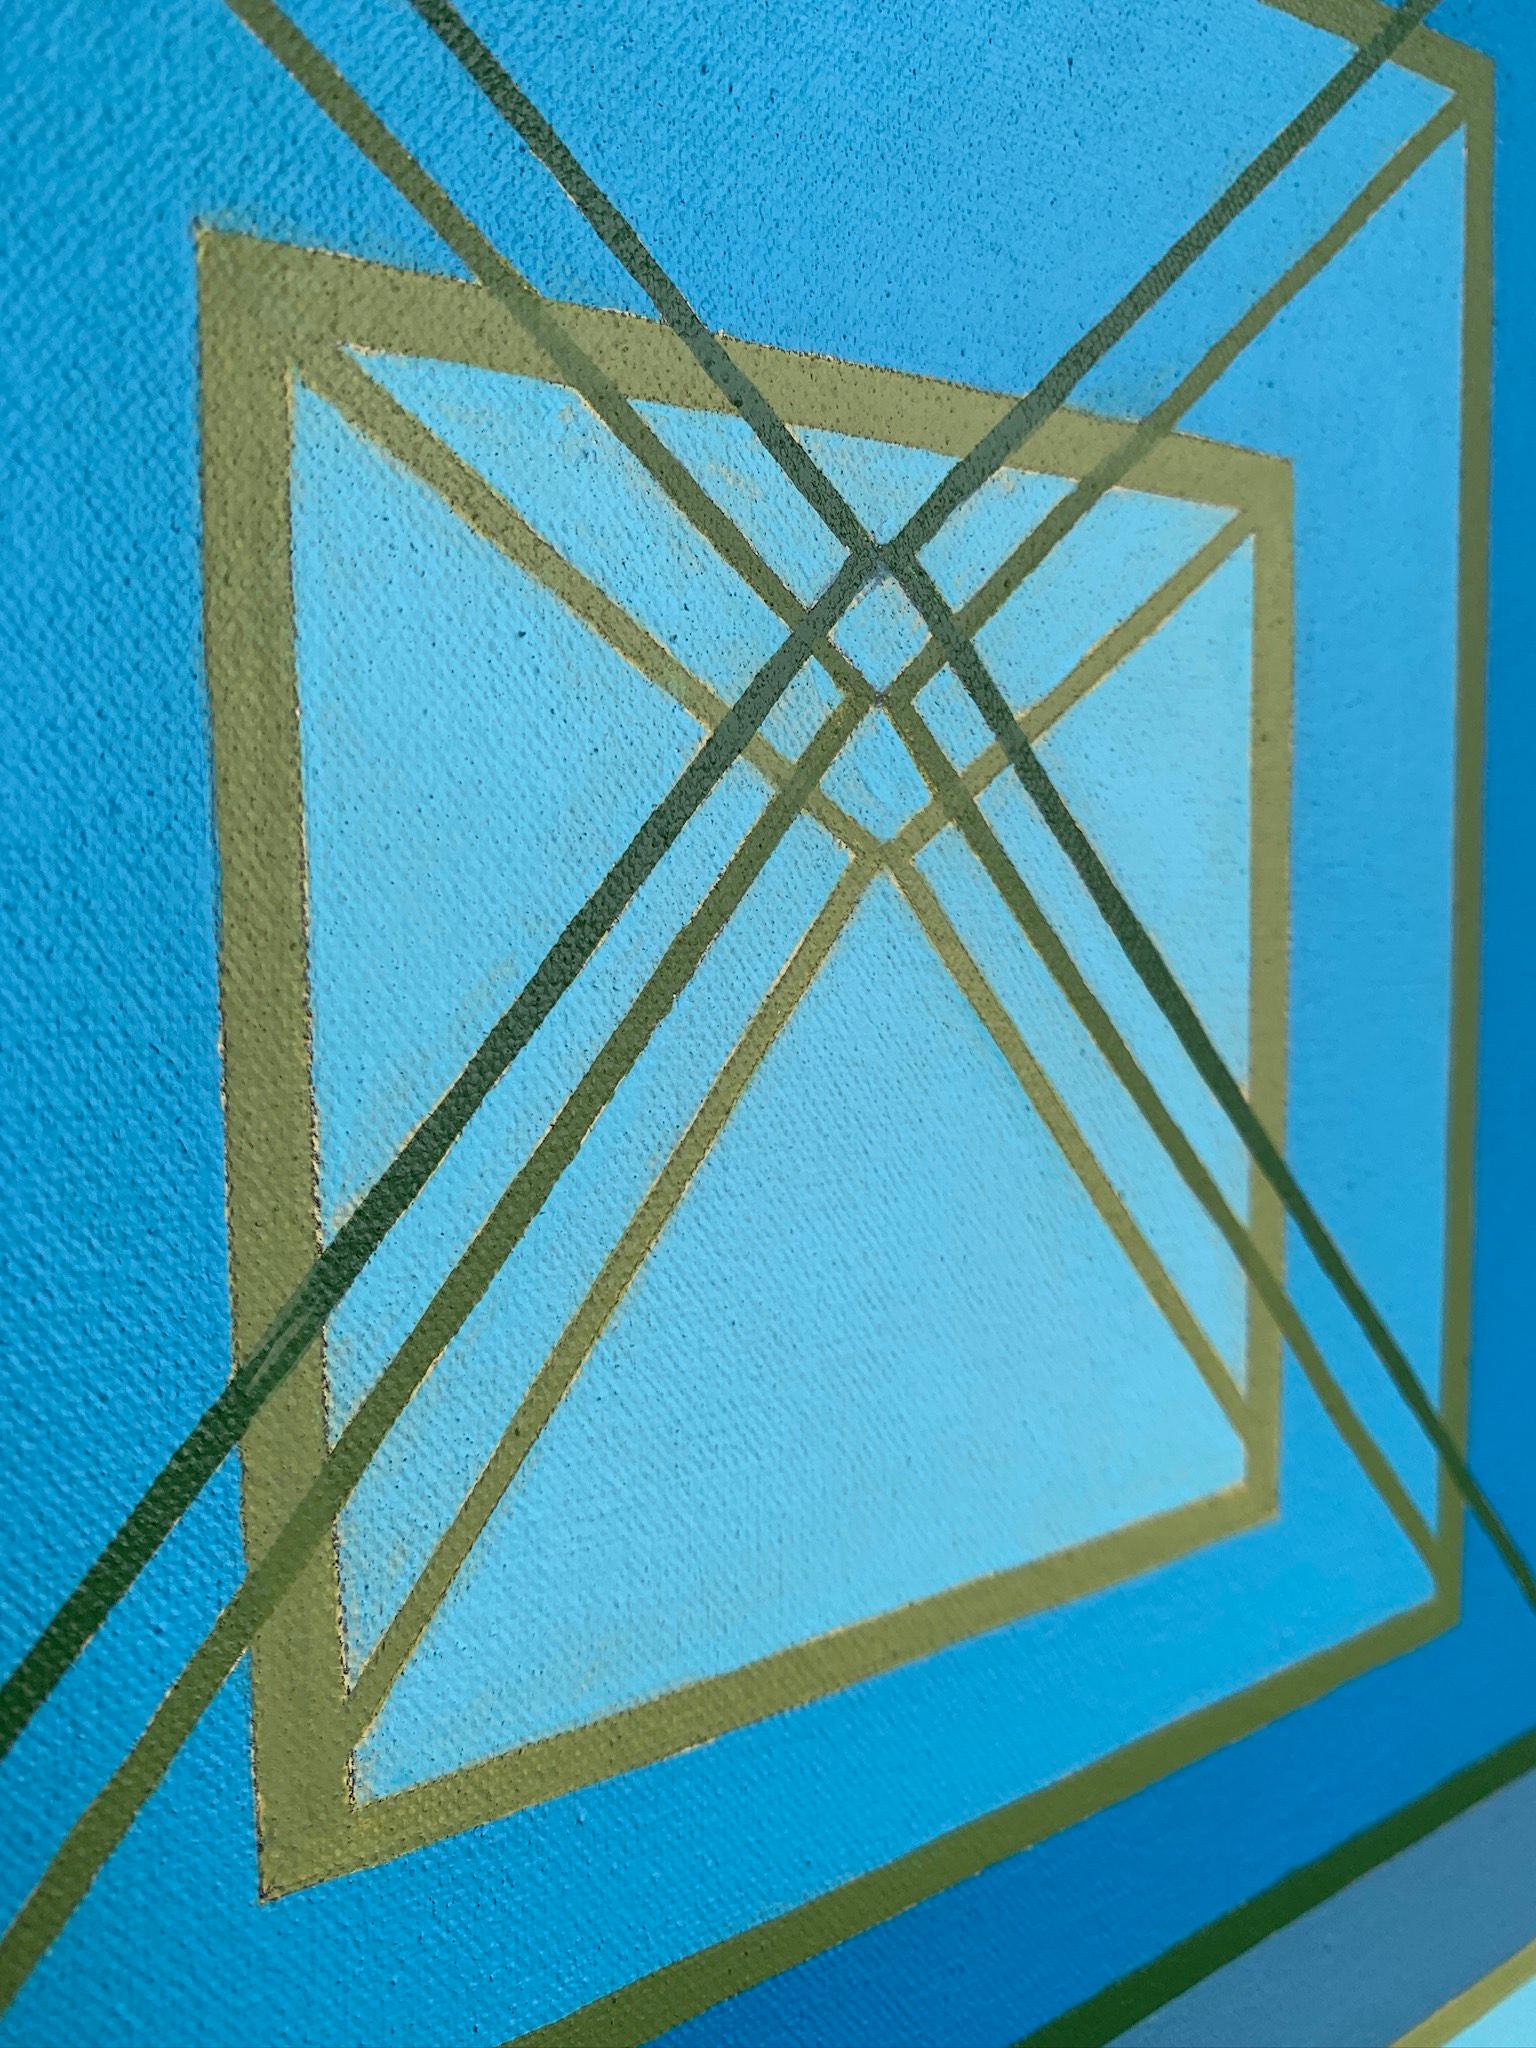 Stacking #4: geometric abstract Op Art painting in blue, green, turquoise & gray - Painting by Benjamin Weaver